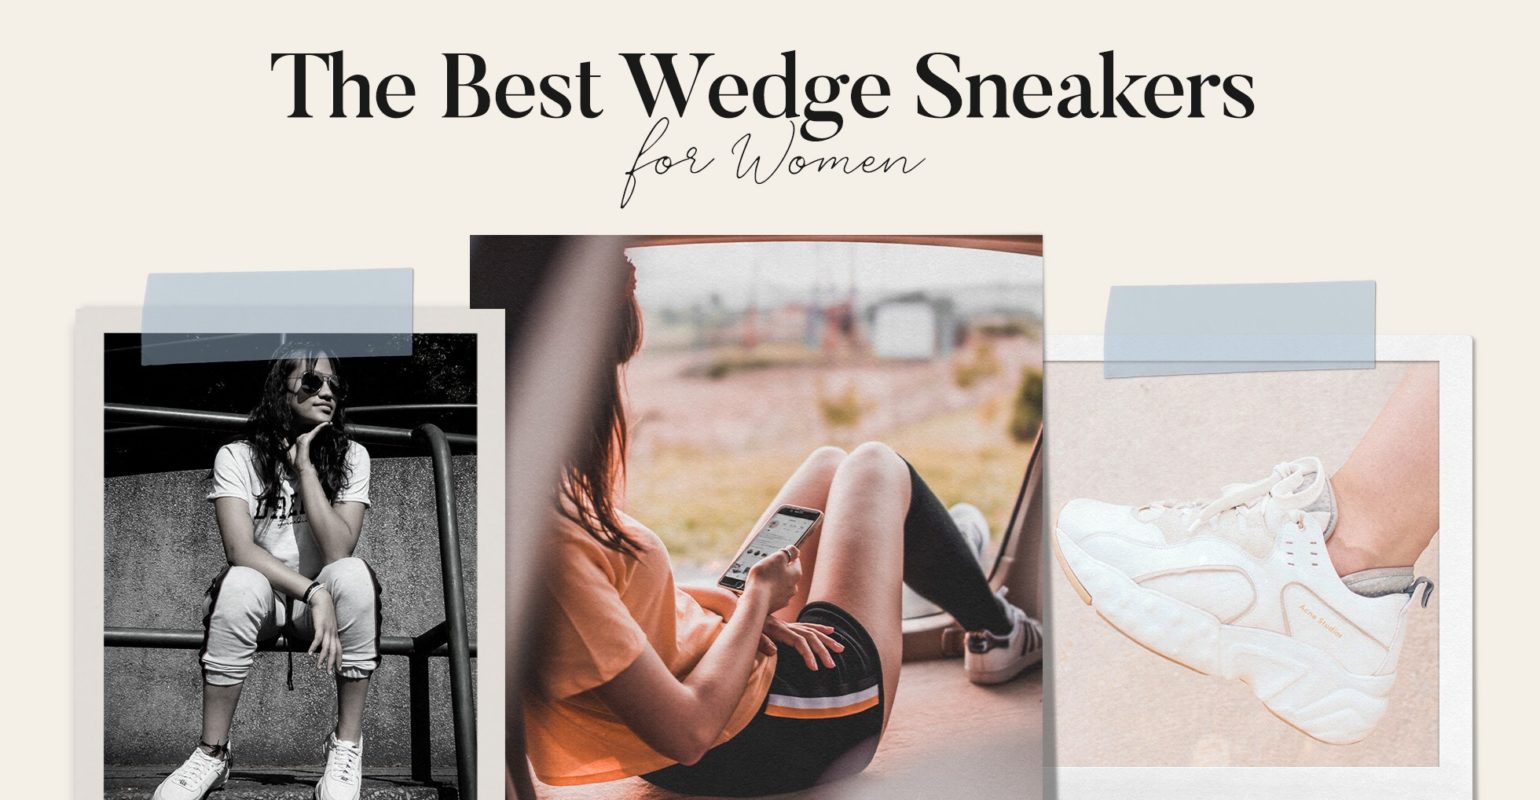 Best Wedge Sneakers for Women Review